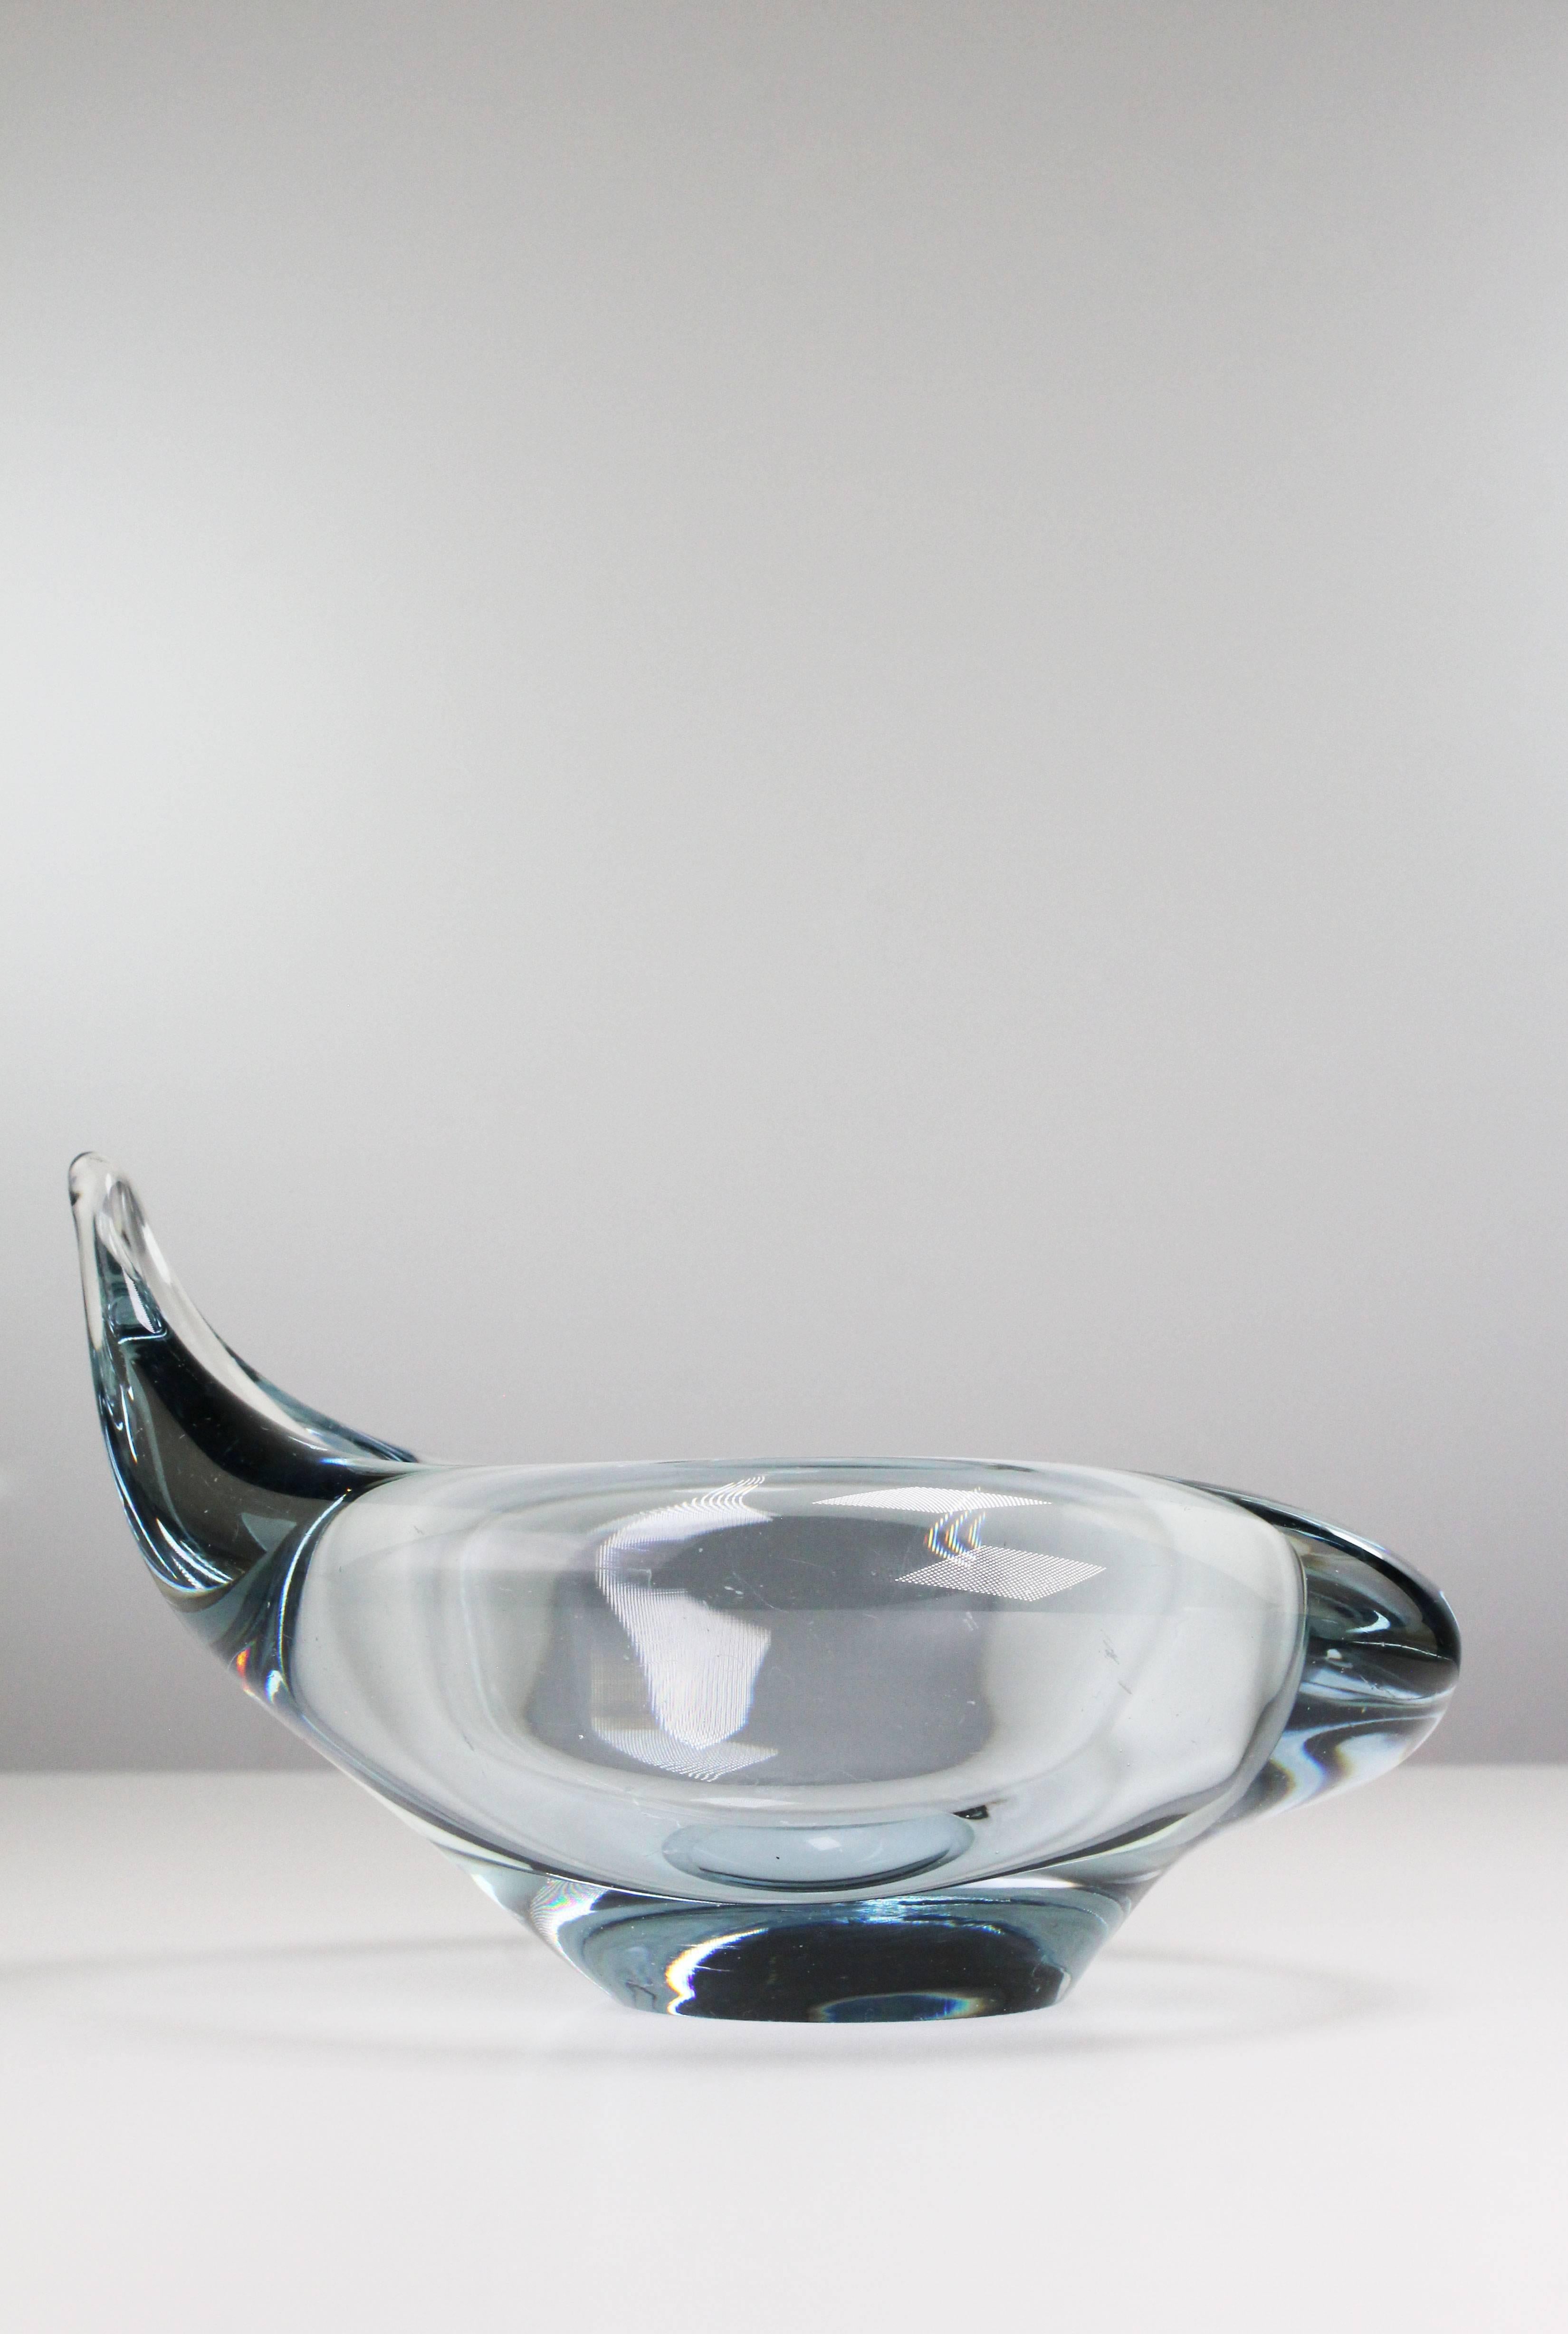 Pair of handmade Danish Mid Century Modern asymmetrical bowls of thick aqua blue glass with a tipped end. From the series Flamingo by glass designer Per Lütken for Holmegaard. Signed Holmegaard PL 1957. Hand blown so each item is unique in its own